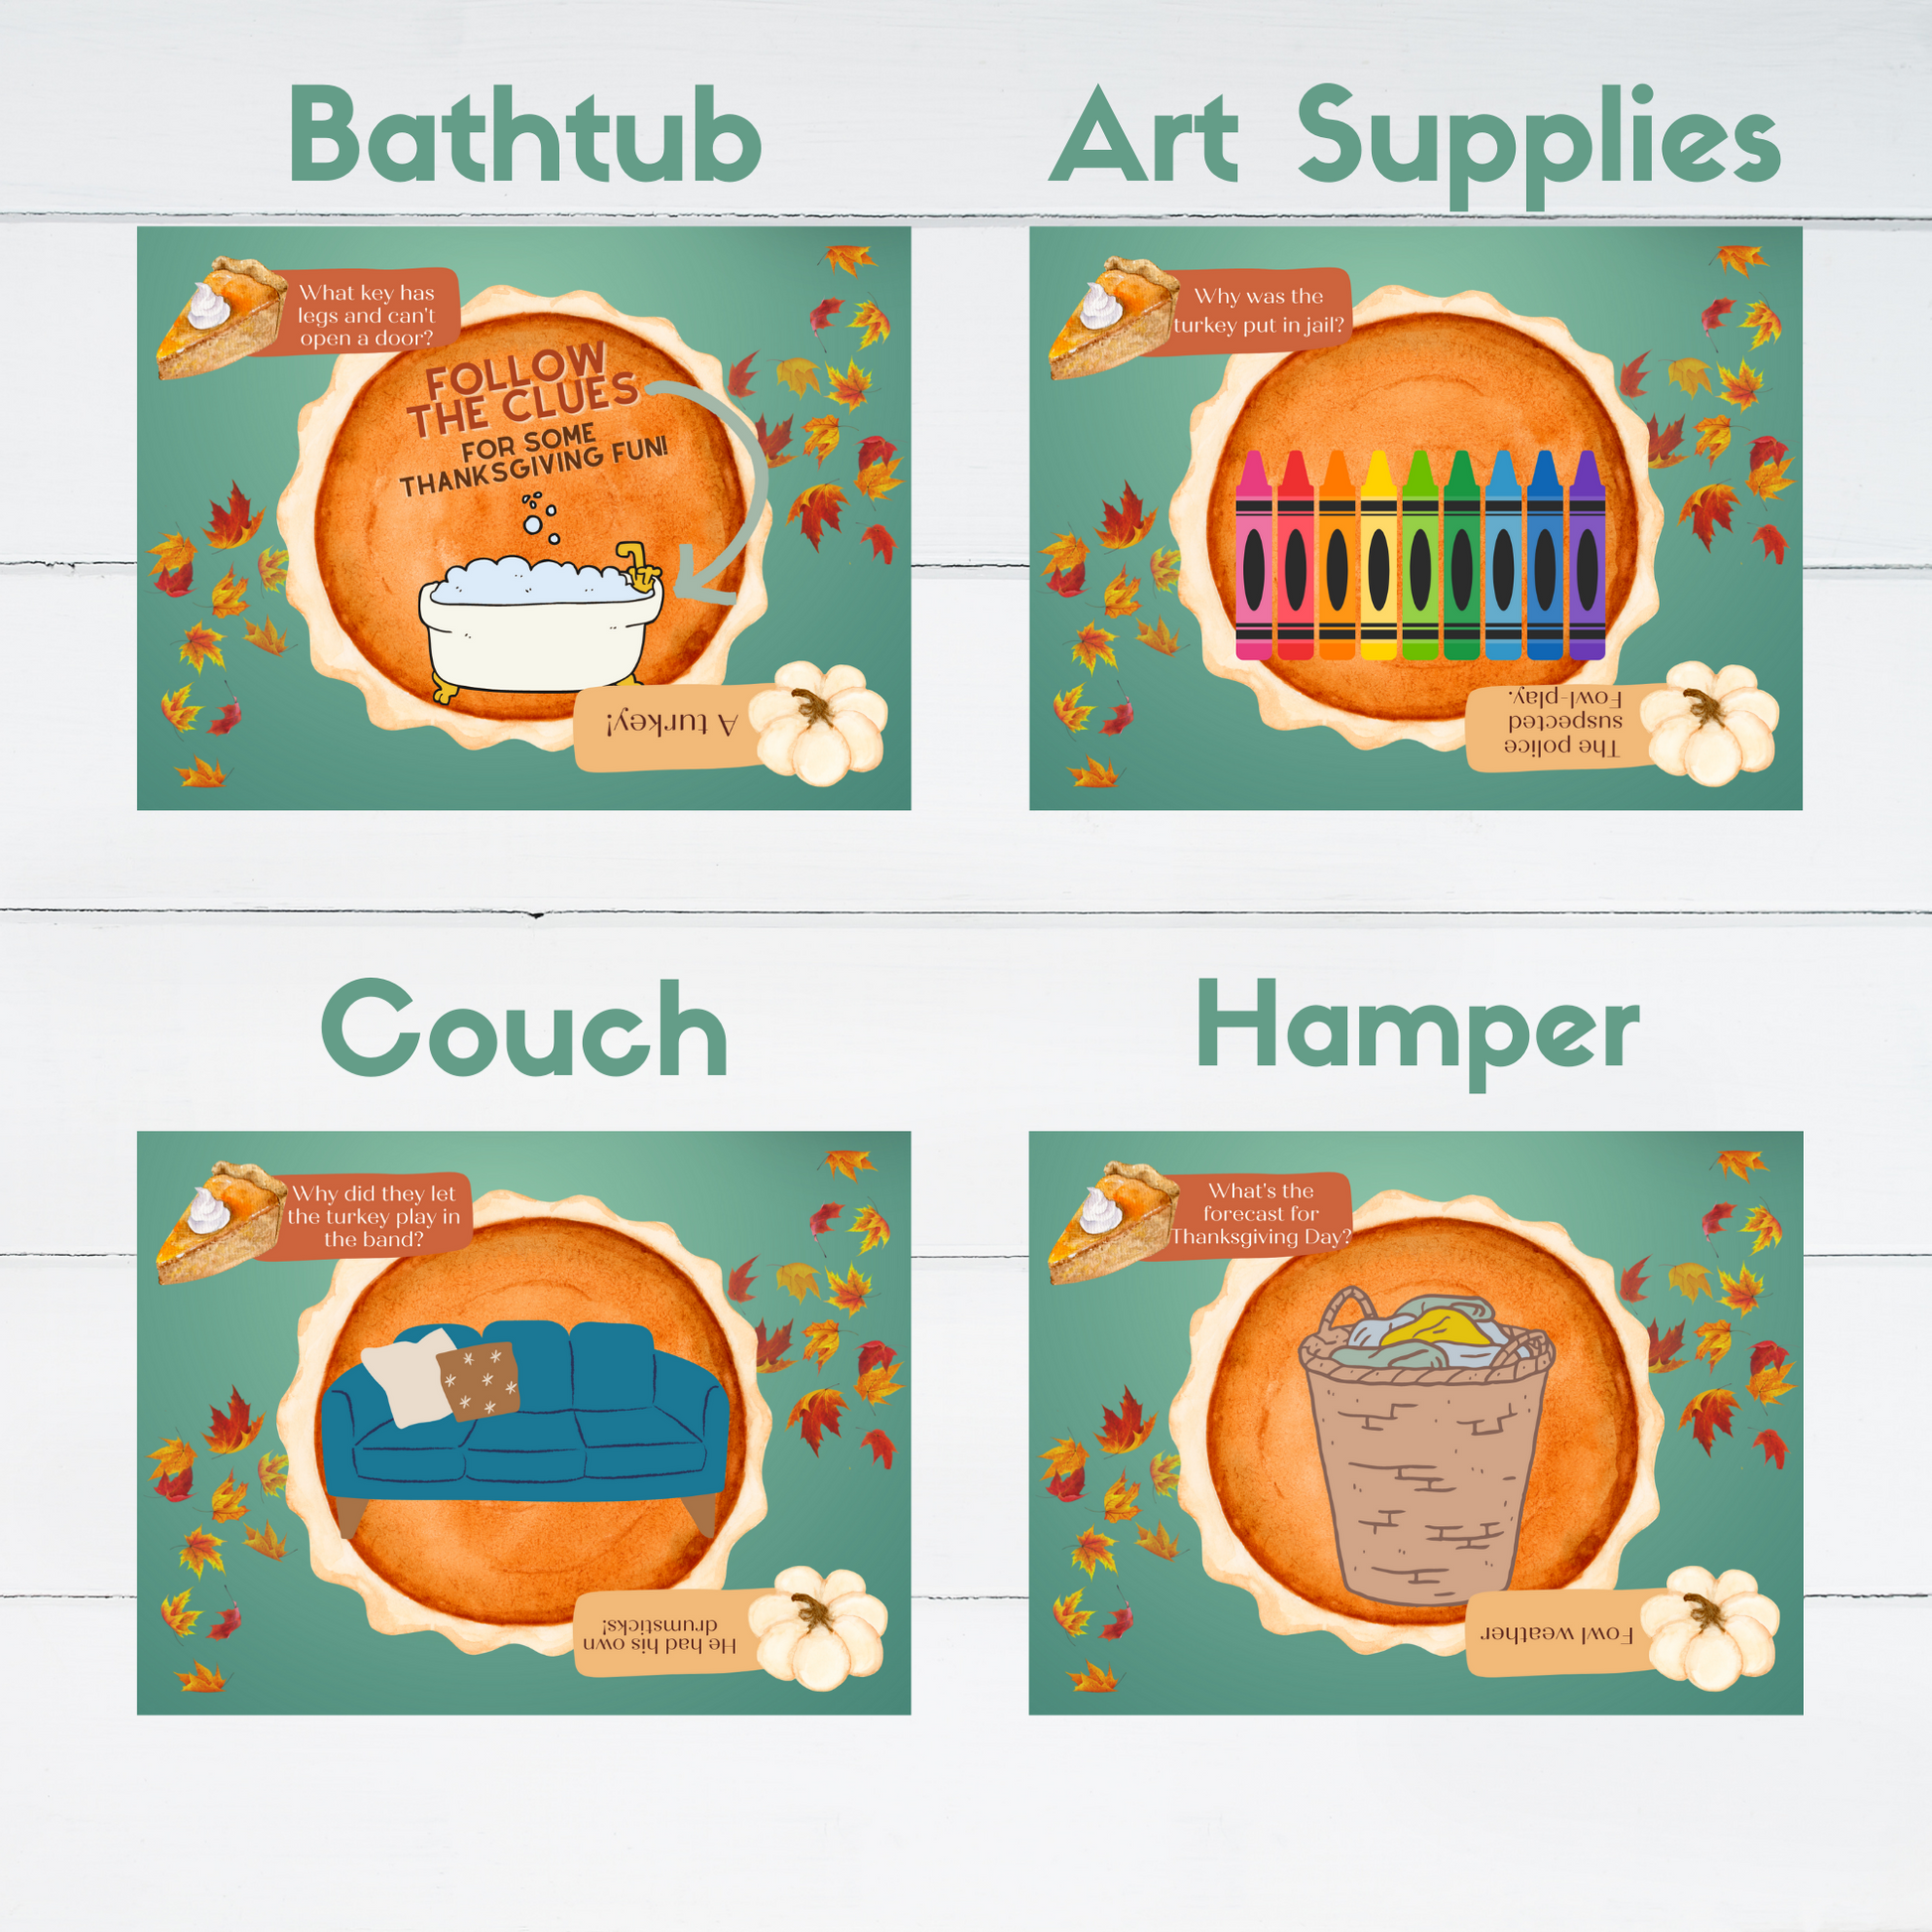 Four clue cards for a Thanksgiving Treasure Hunt shown. Clues lead to a bathtub, art supplies, couch, and hamper.